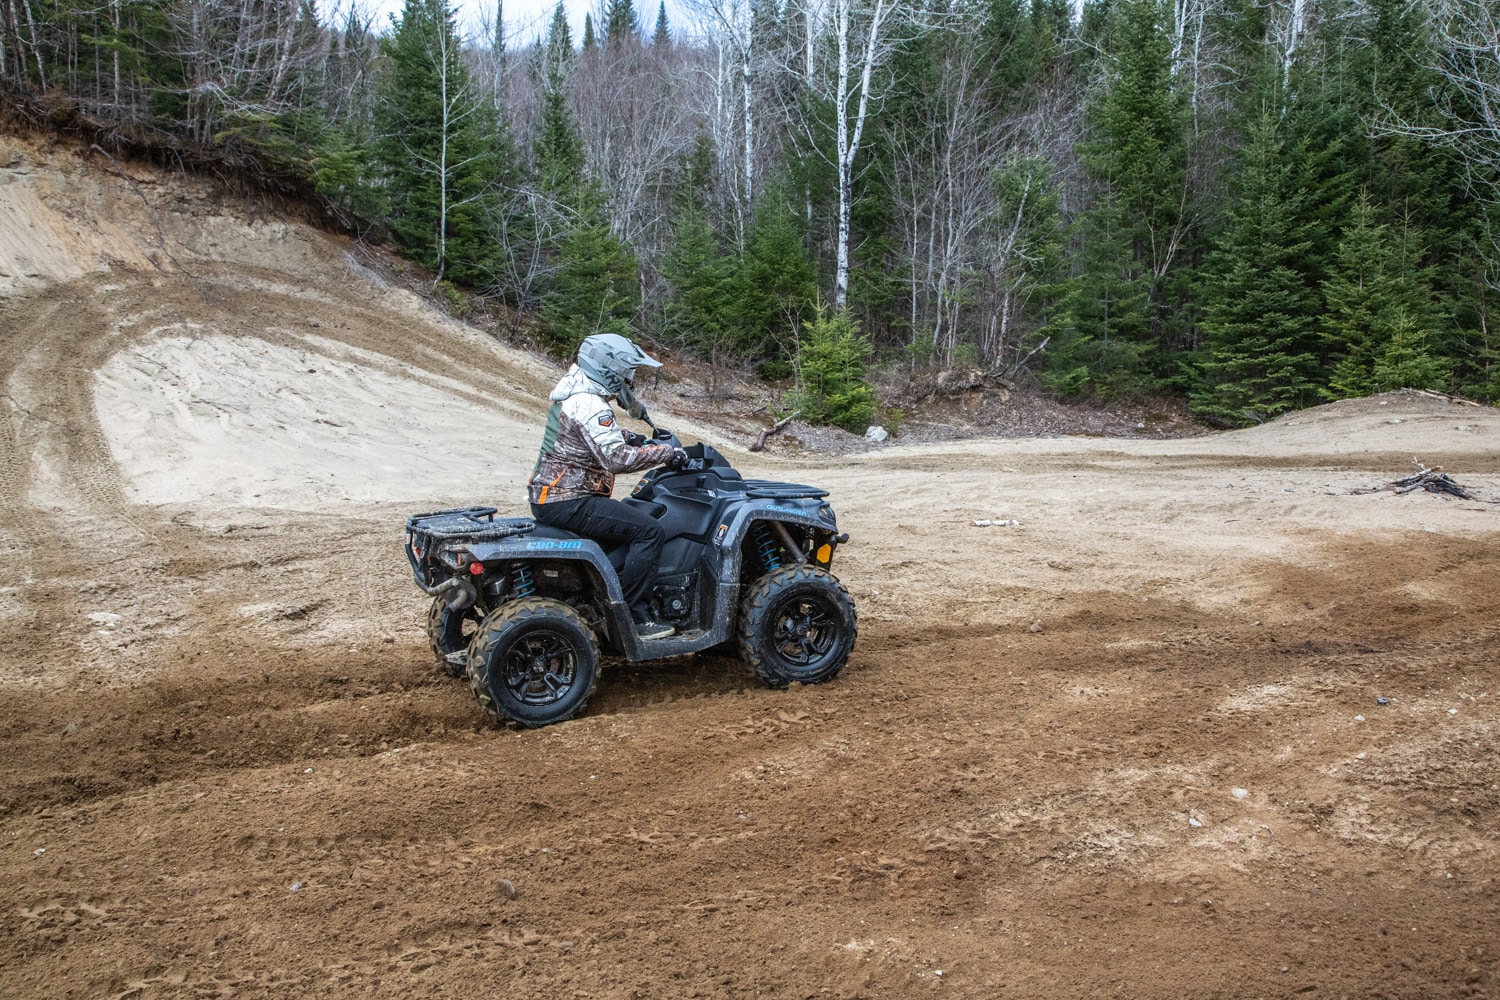 What you should know before riding an ATV